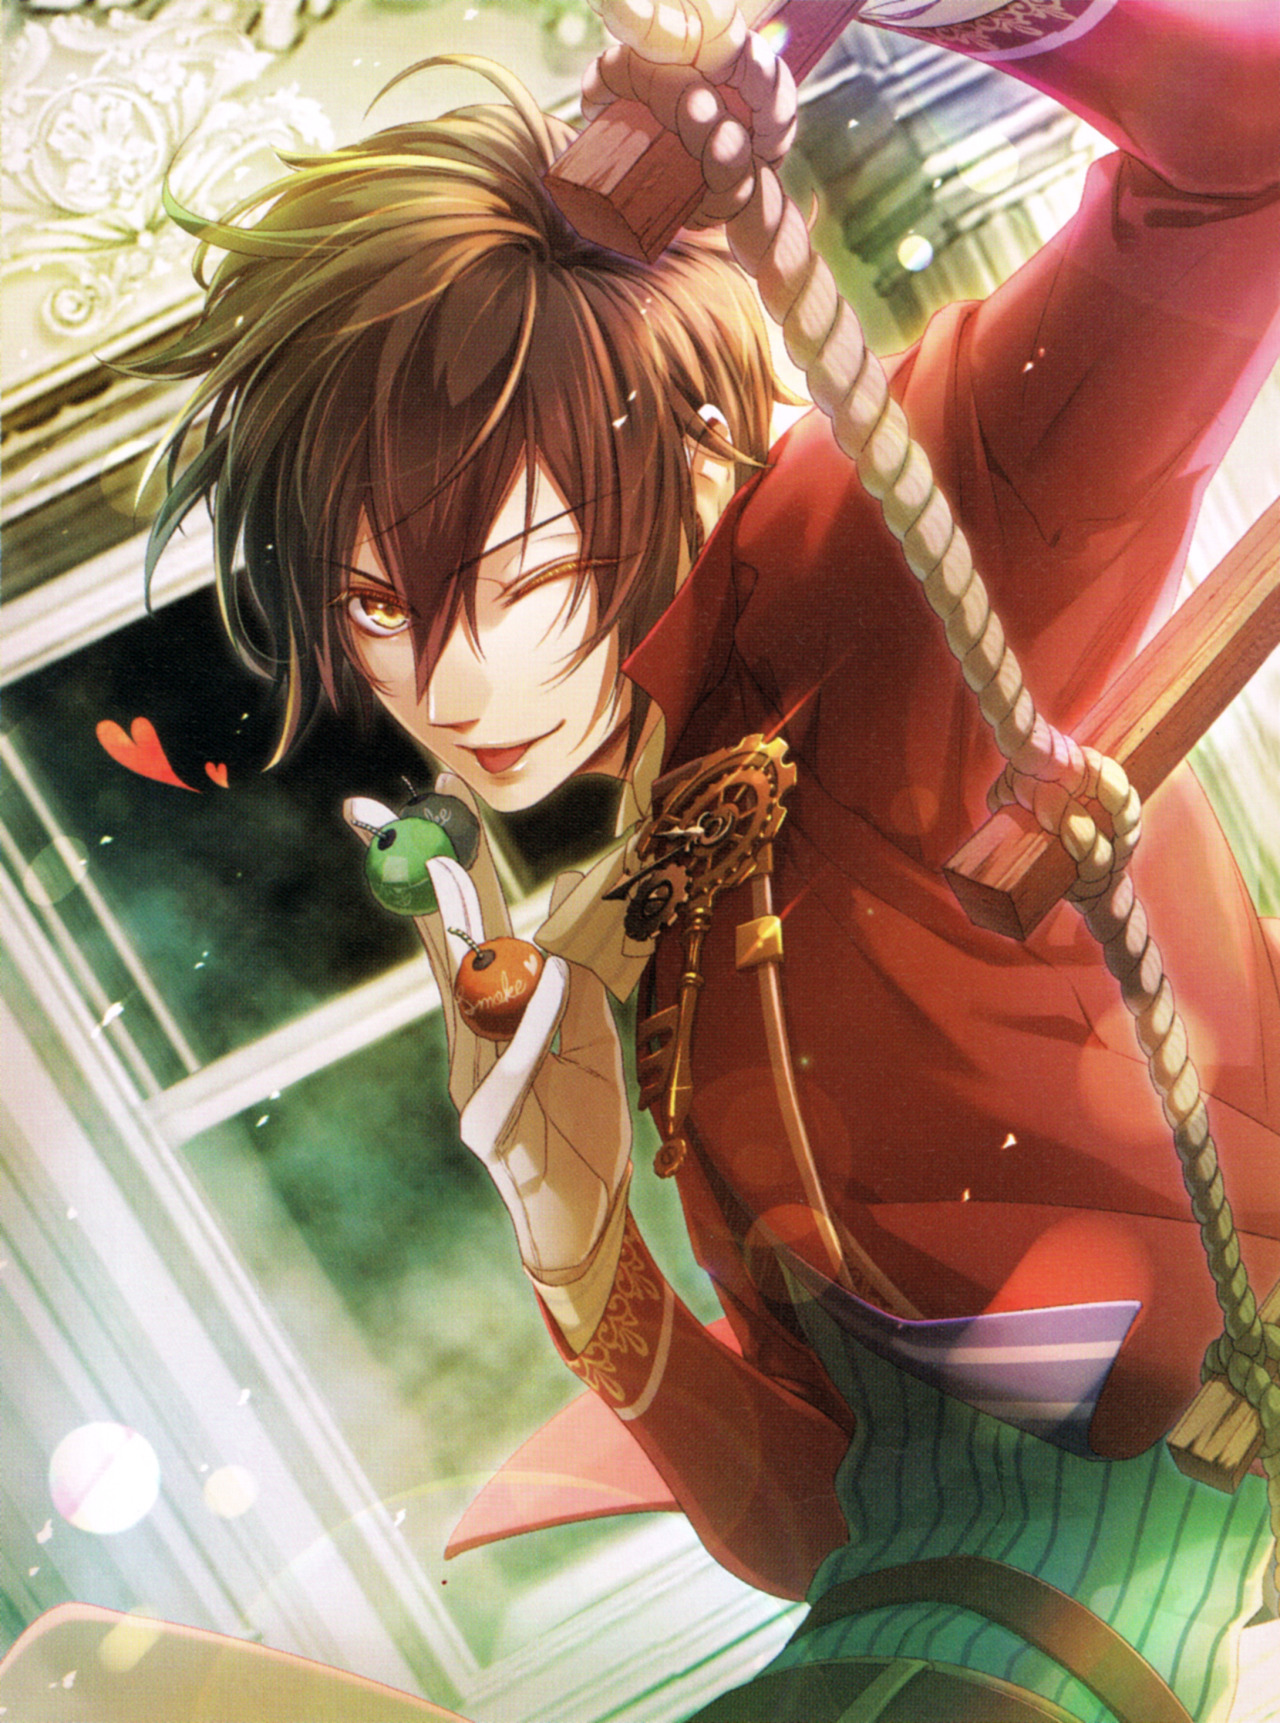 code realize guardian of rebirth pc download